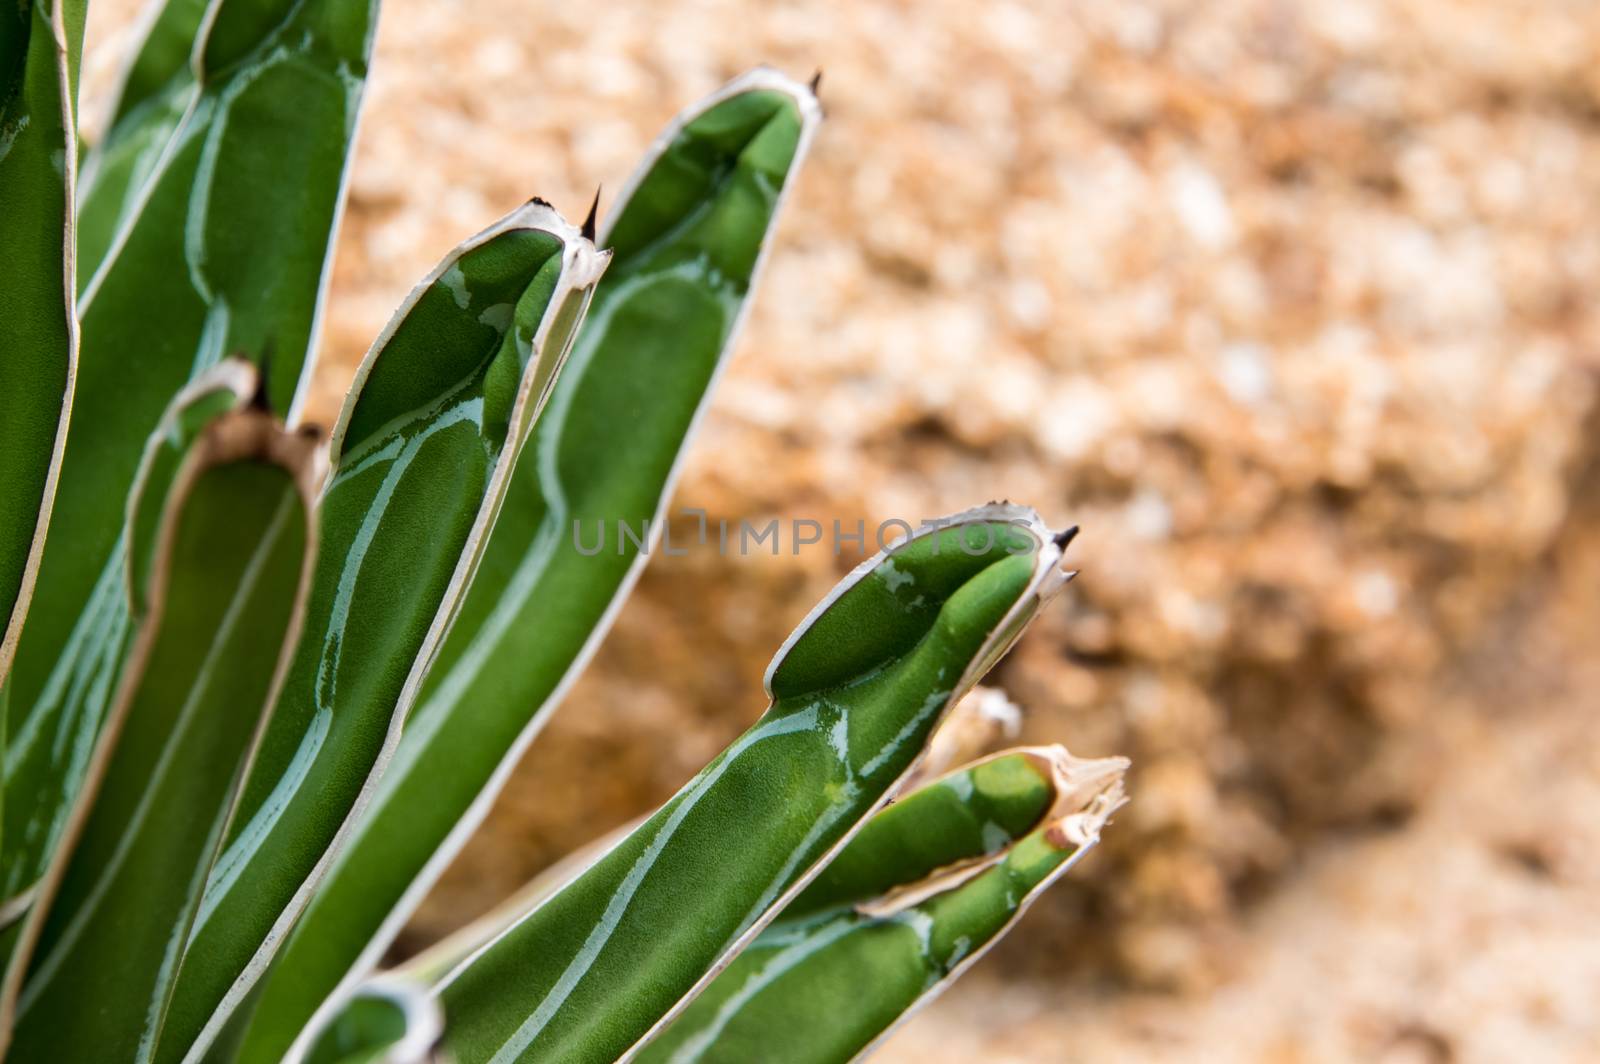 Succulent plant close-up, fresh leaves detail of Agave victoriae by Satakorn